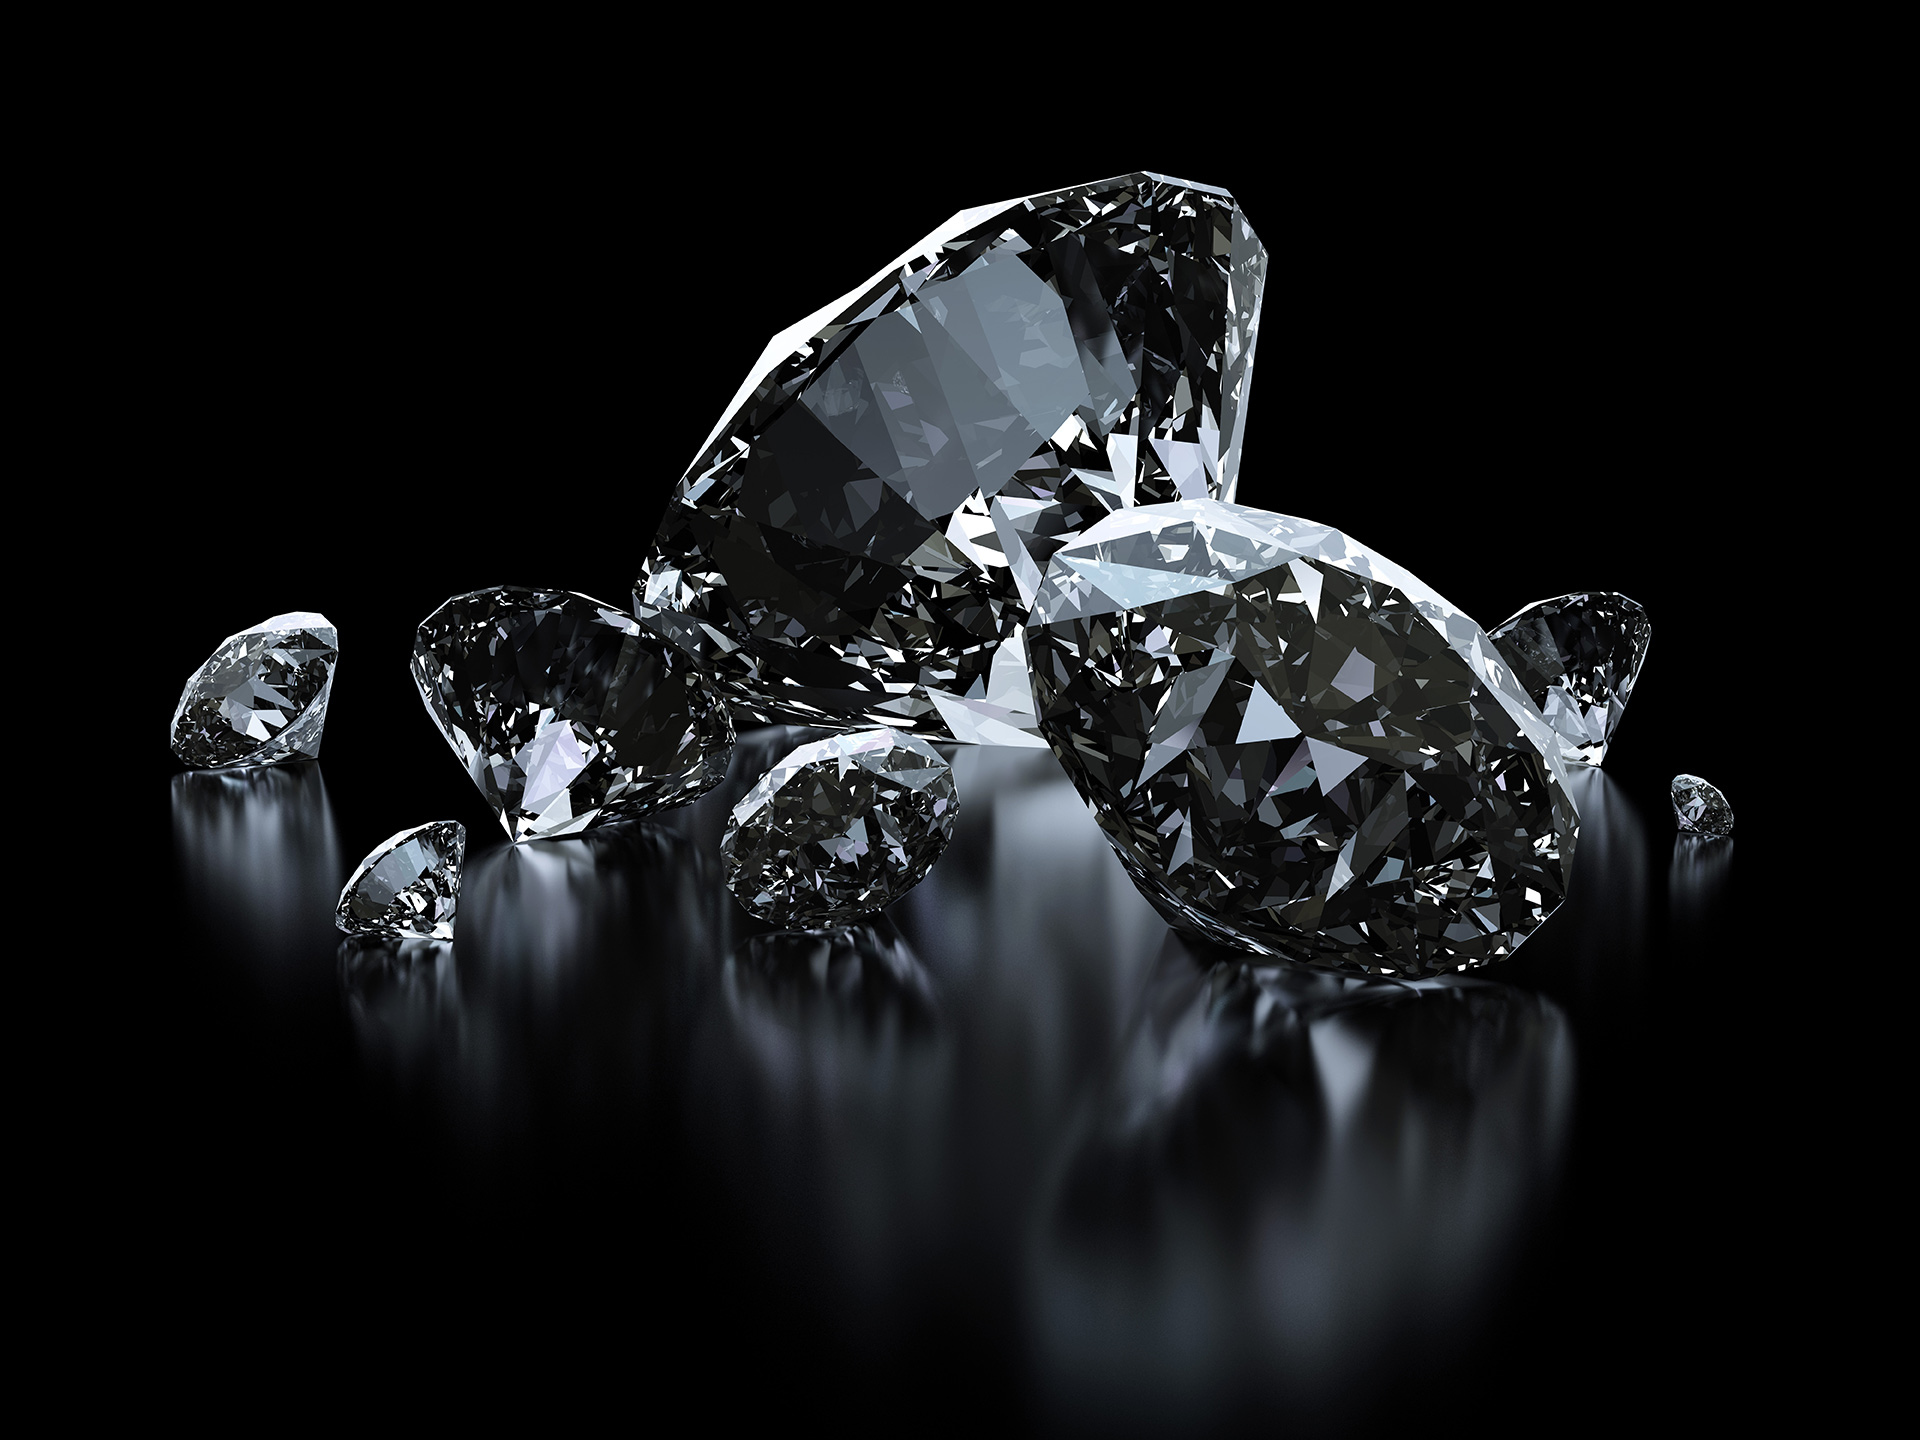 What is difference between cubic zirconia (CZ) vs diamond? – PEARLY LUSTRE